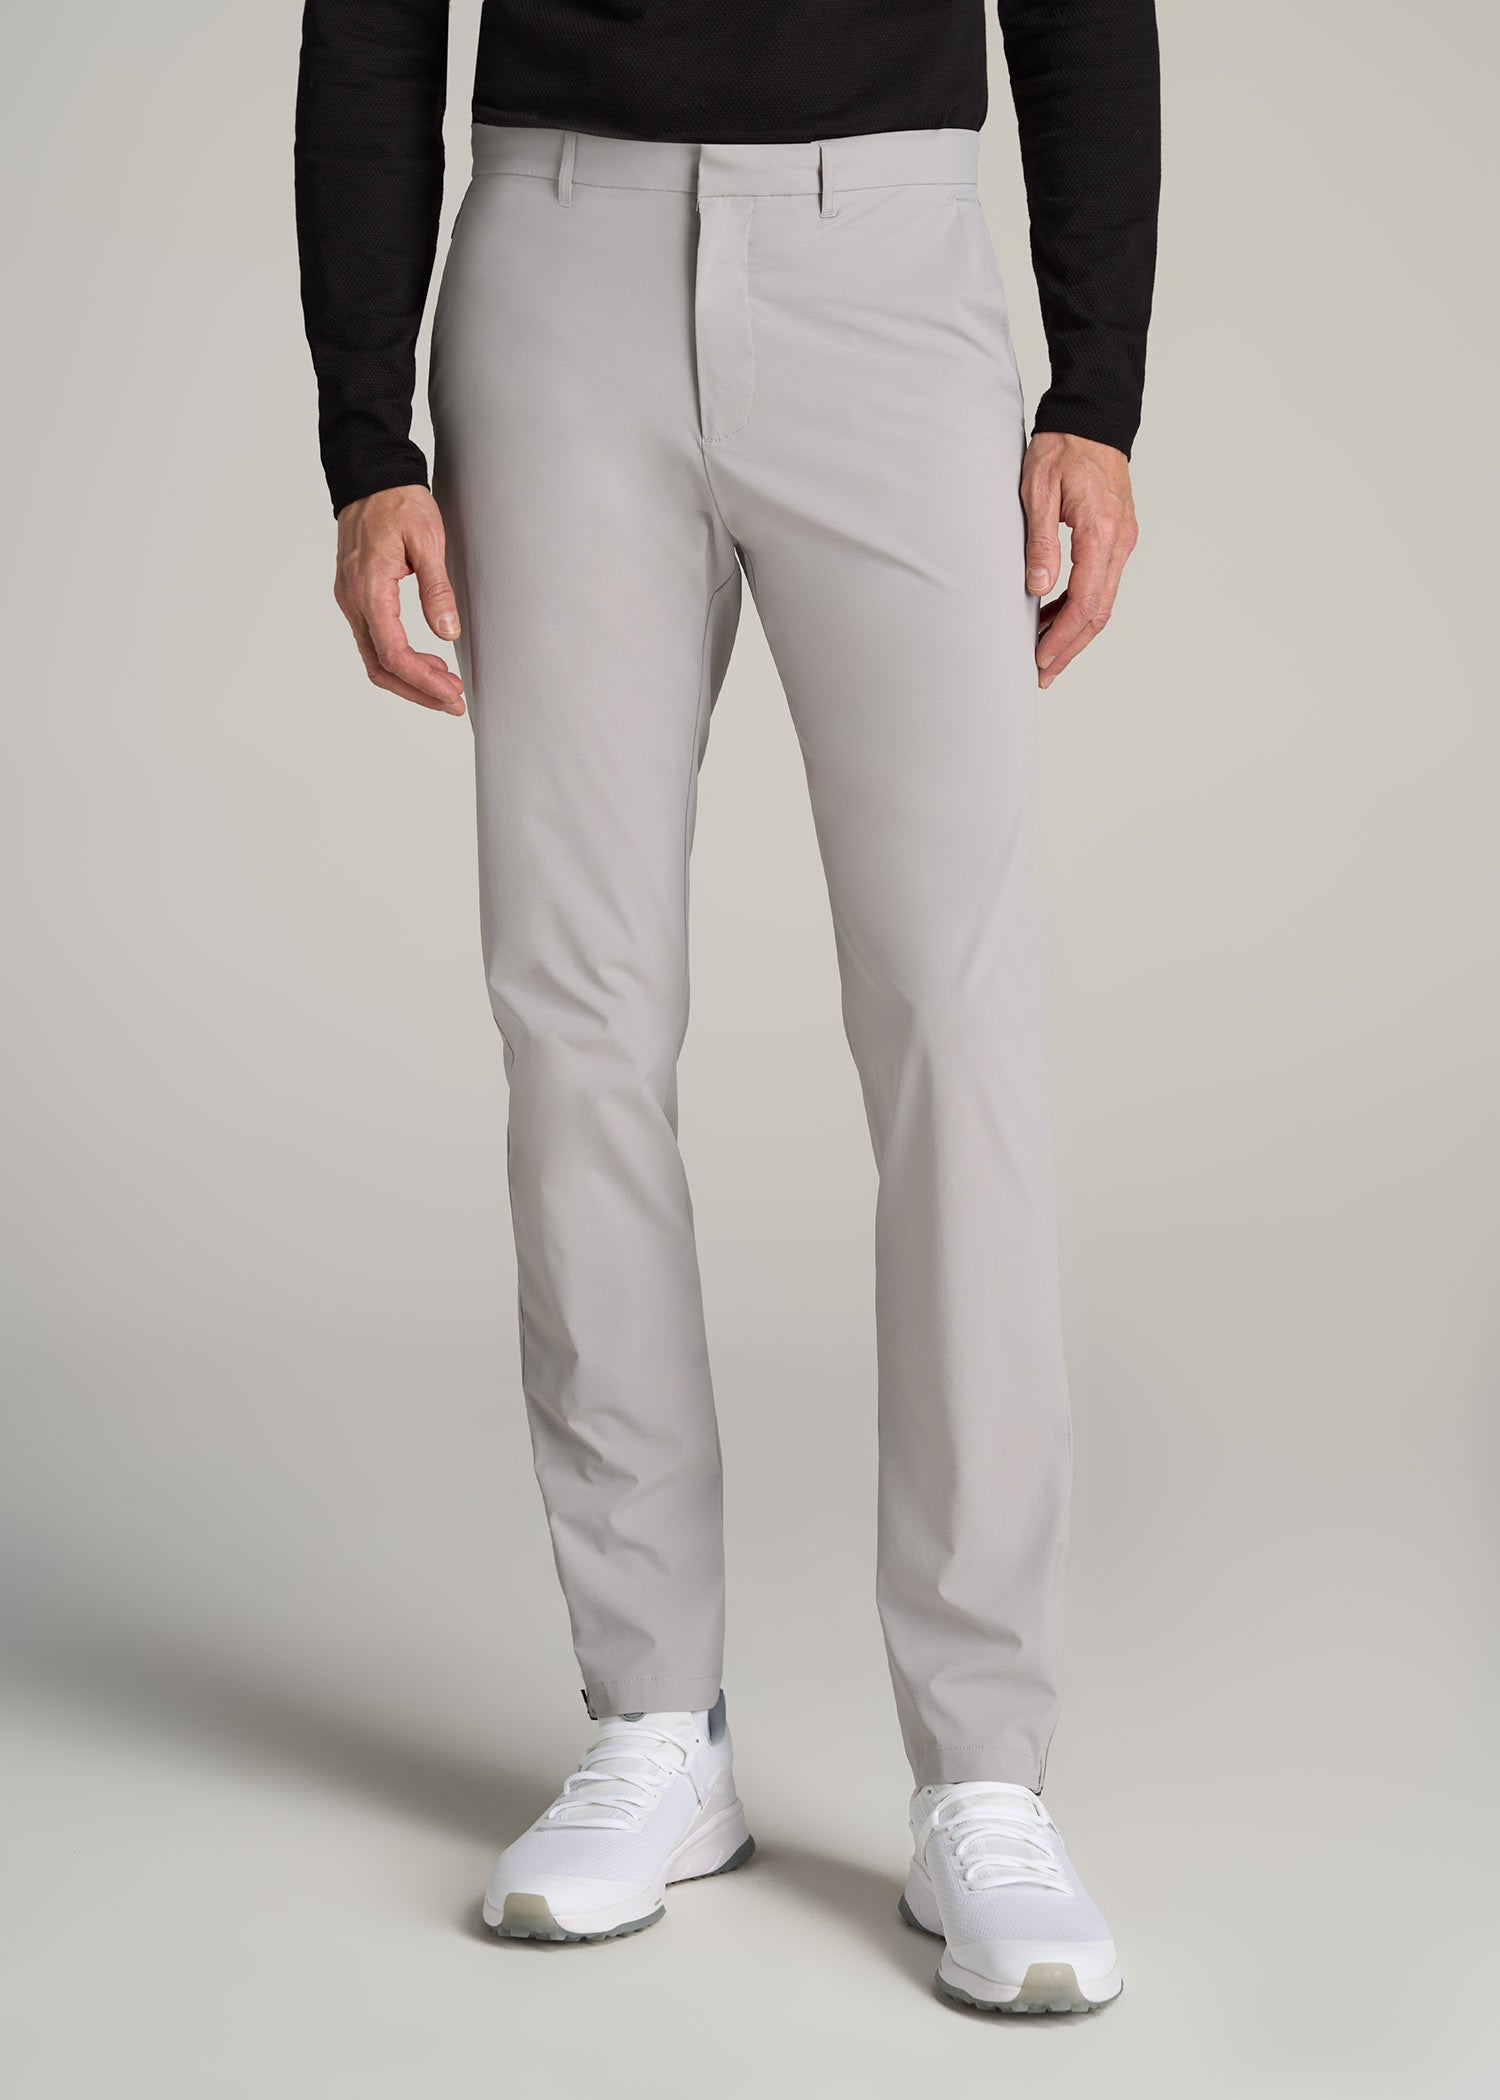    American-Tall-Men-Performance-Casual-Pants-Light-Grey-front